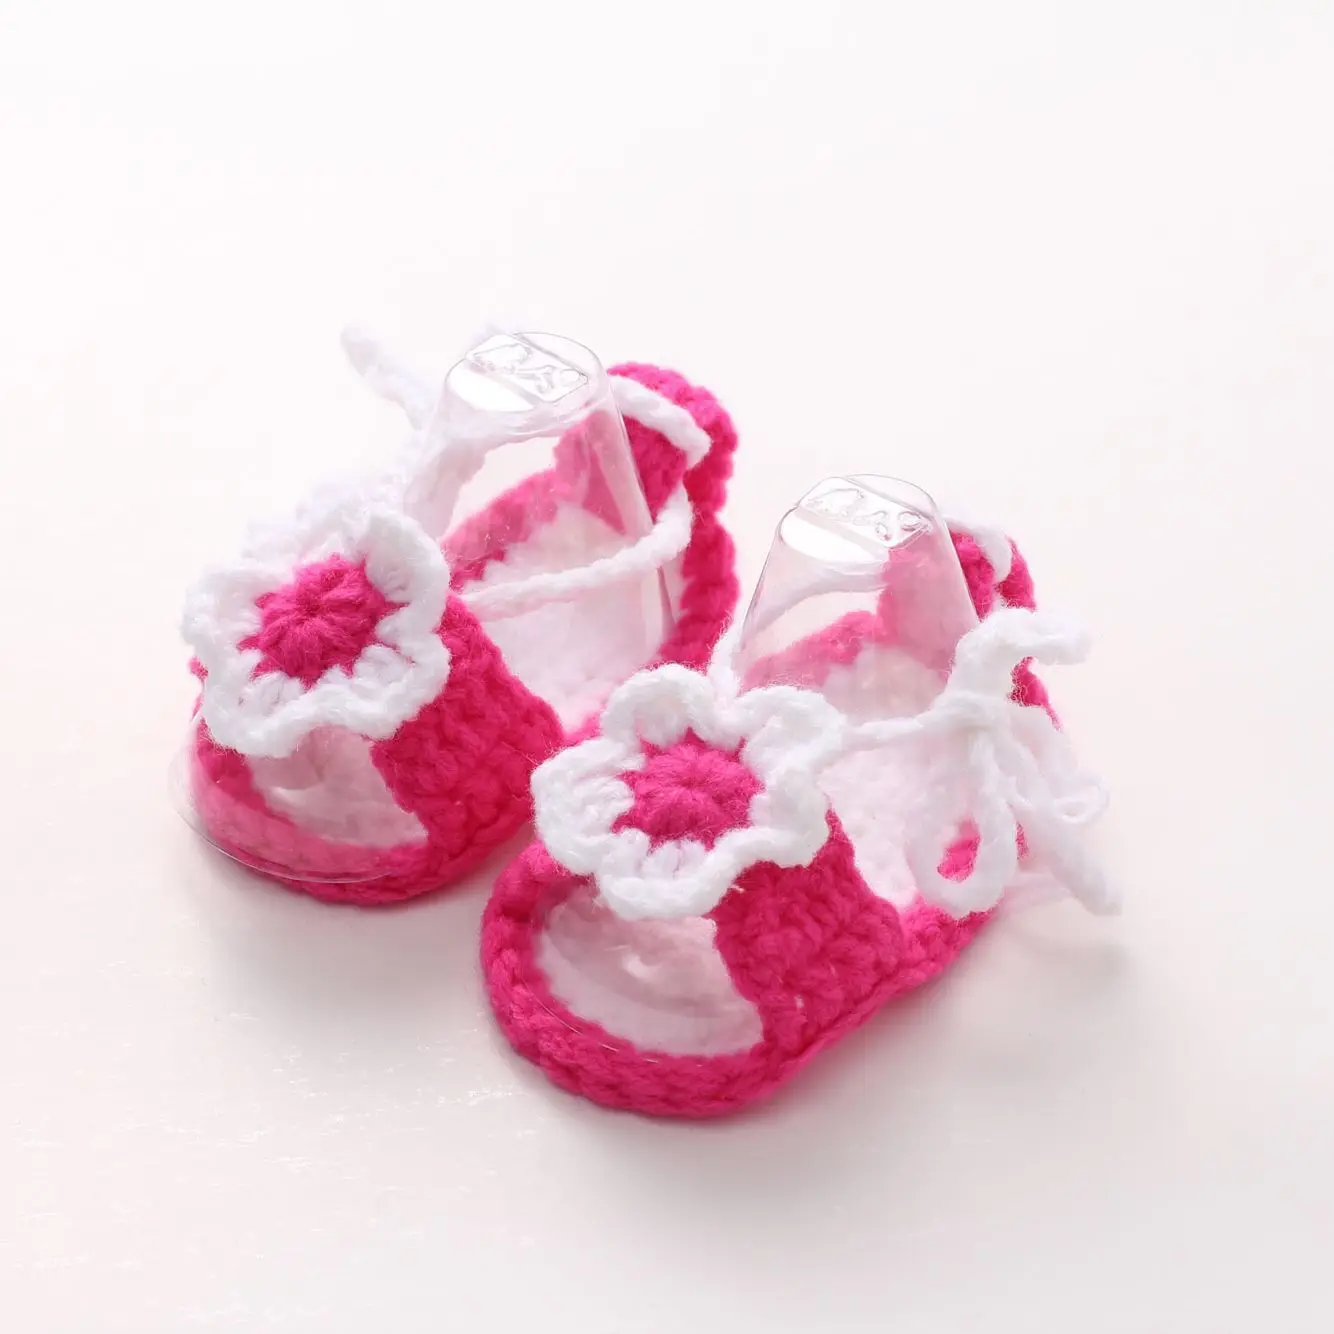 HANDMADE CROCHET BABY FIRST SHOES WOOL CASUAL BOOTS TRAINERS SLIPPERS UNISEX 